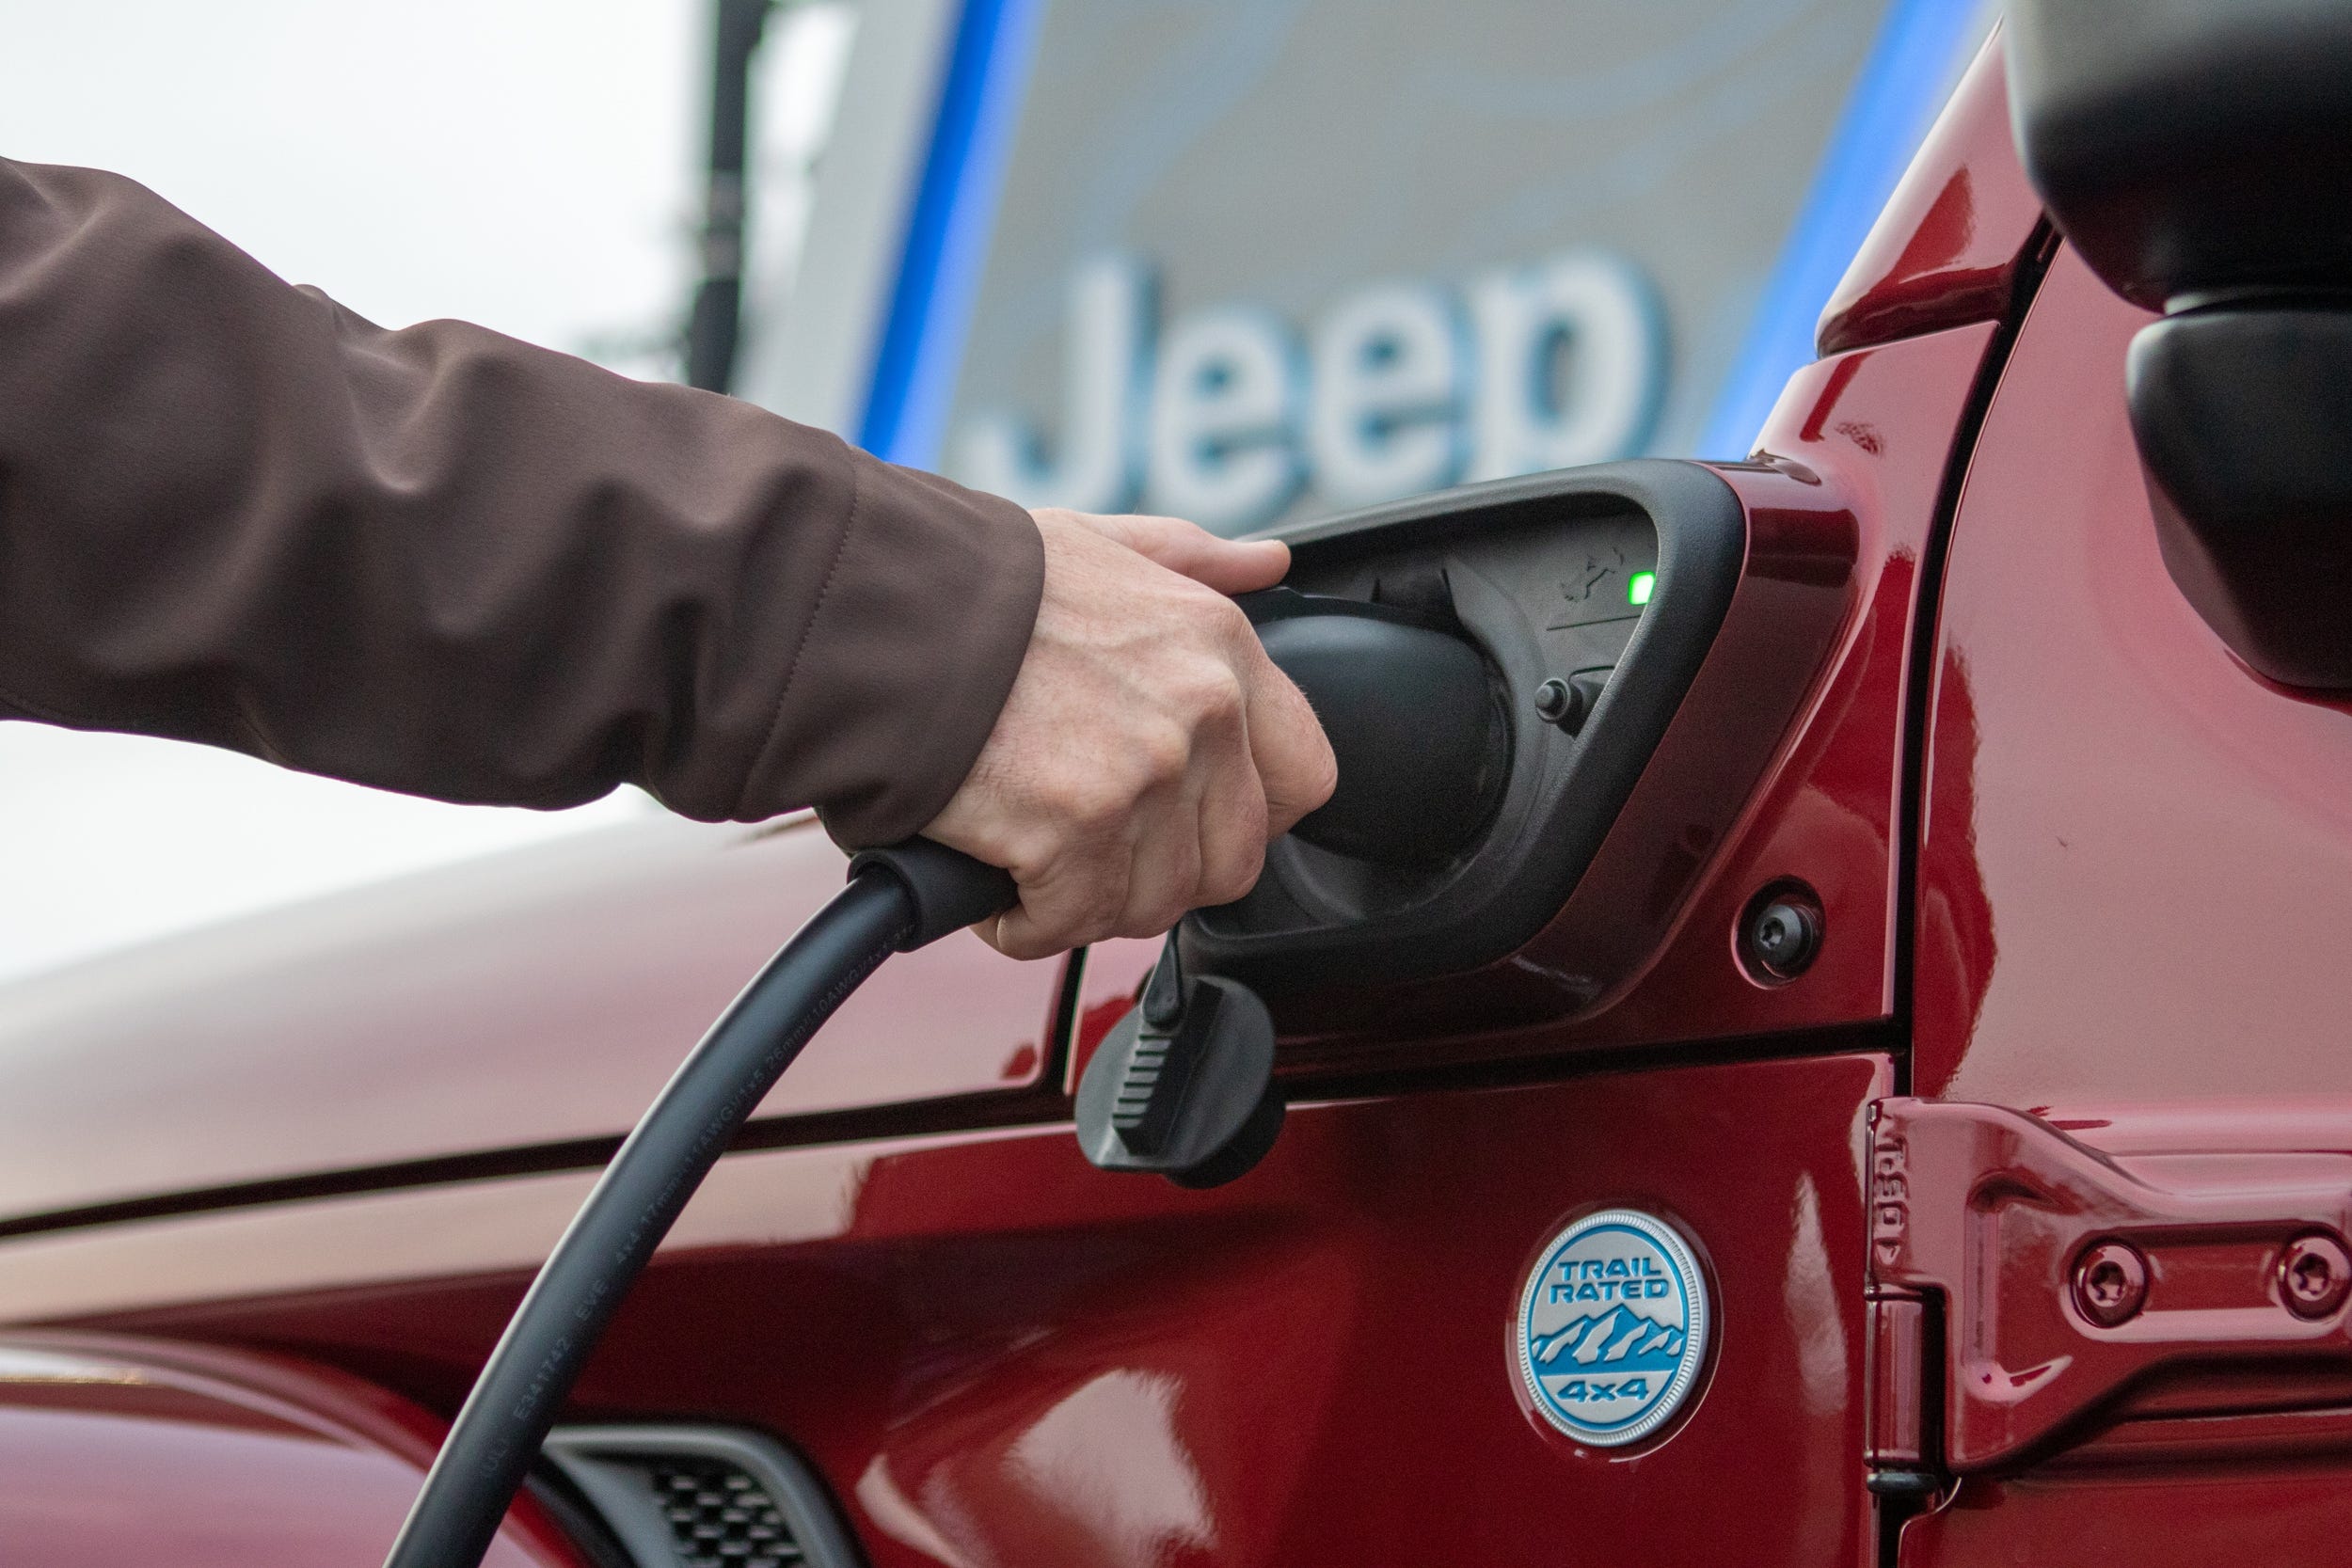 The Jeep brand is creating the Jeep 4xe Charging Network, installing Jeep-branded EV charging stations at or near the trailheads of Jeep Badge of Honor off-road trails over the next year. The trailhead chargers coincide with the launch of 2021 Jeep Wrangler 4xe plug-in hybrid.